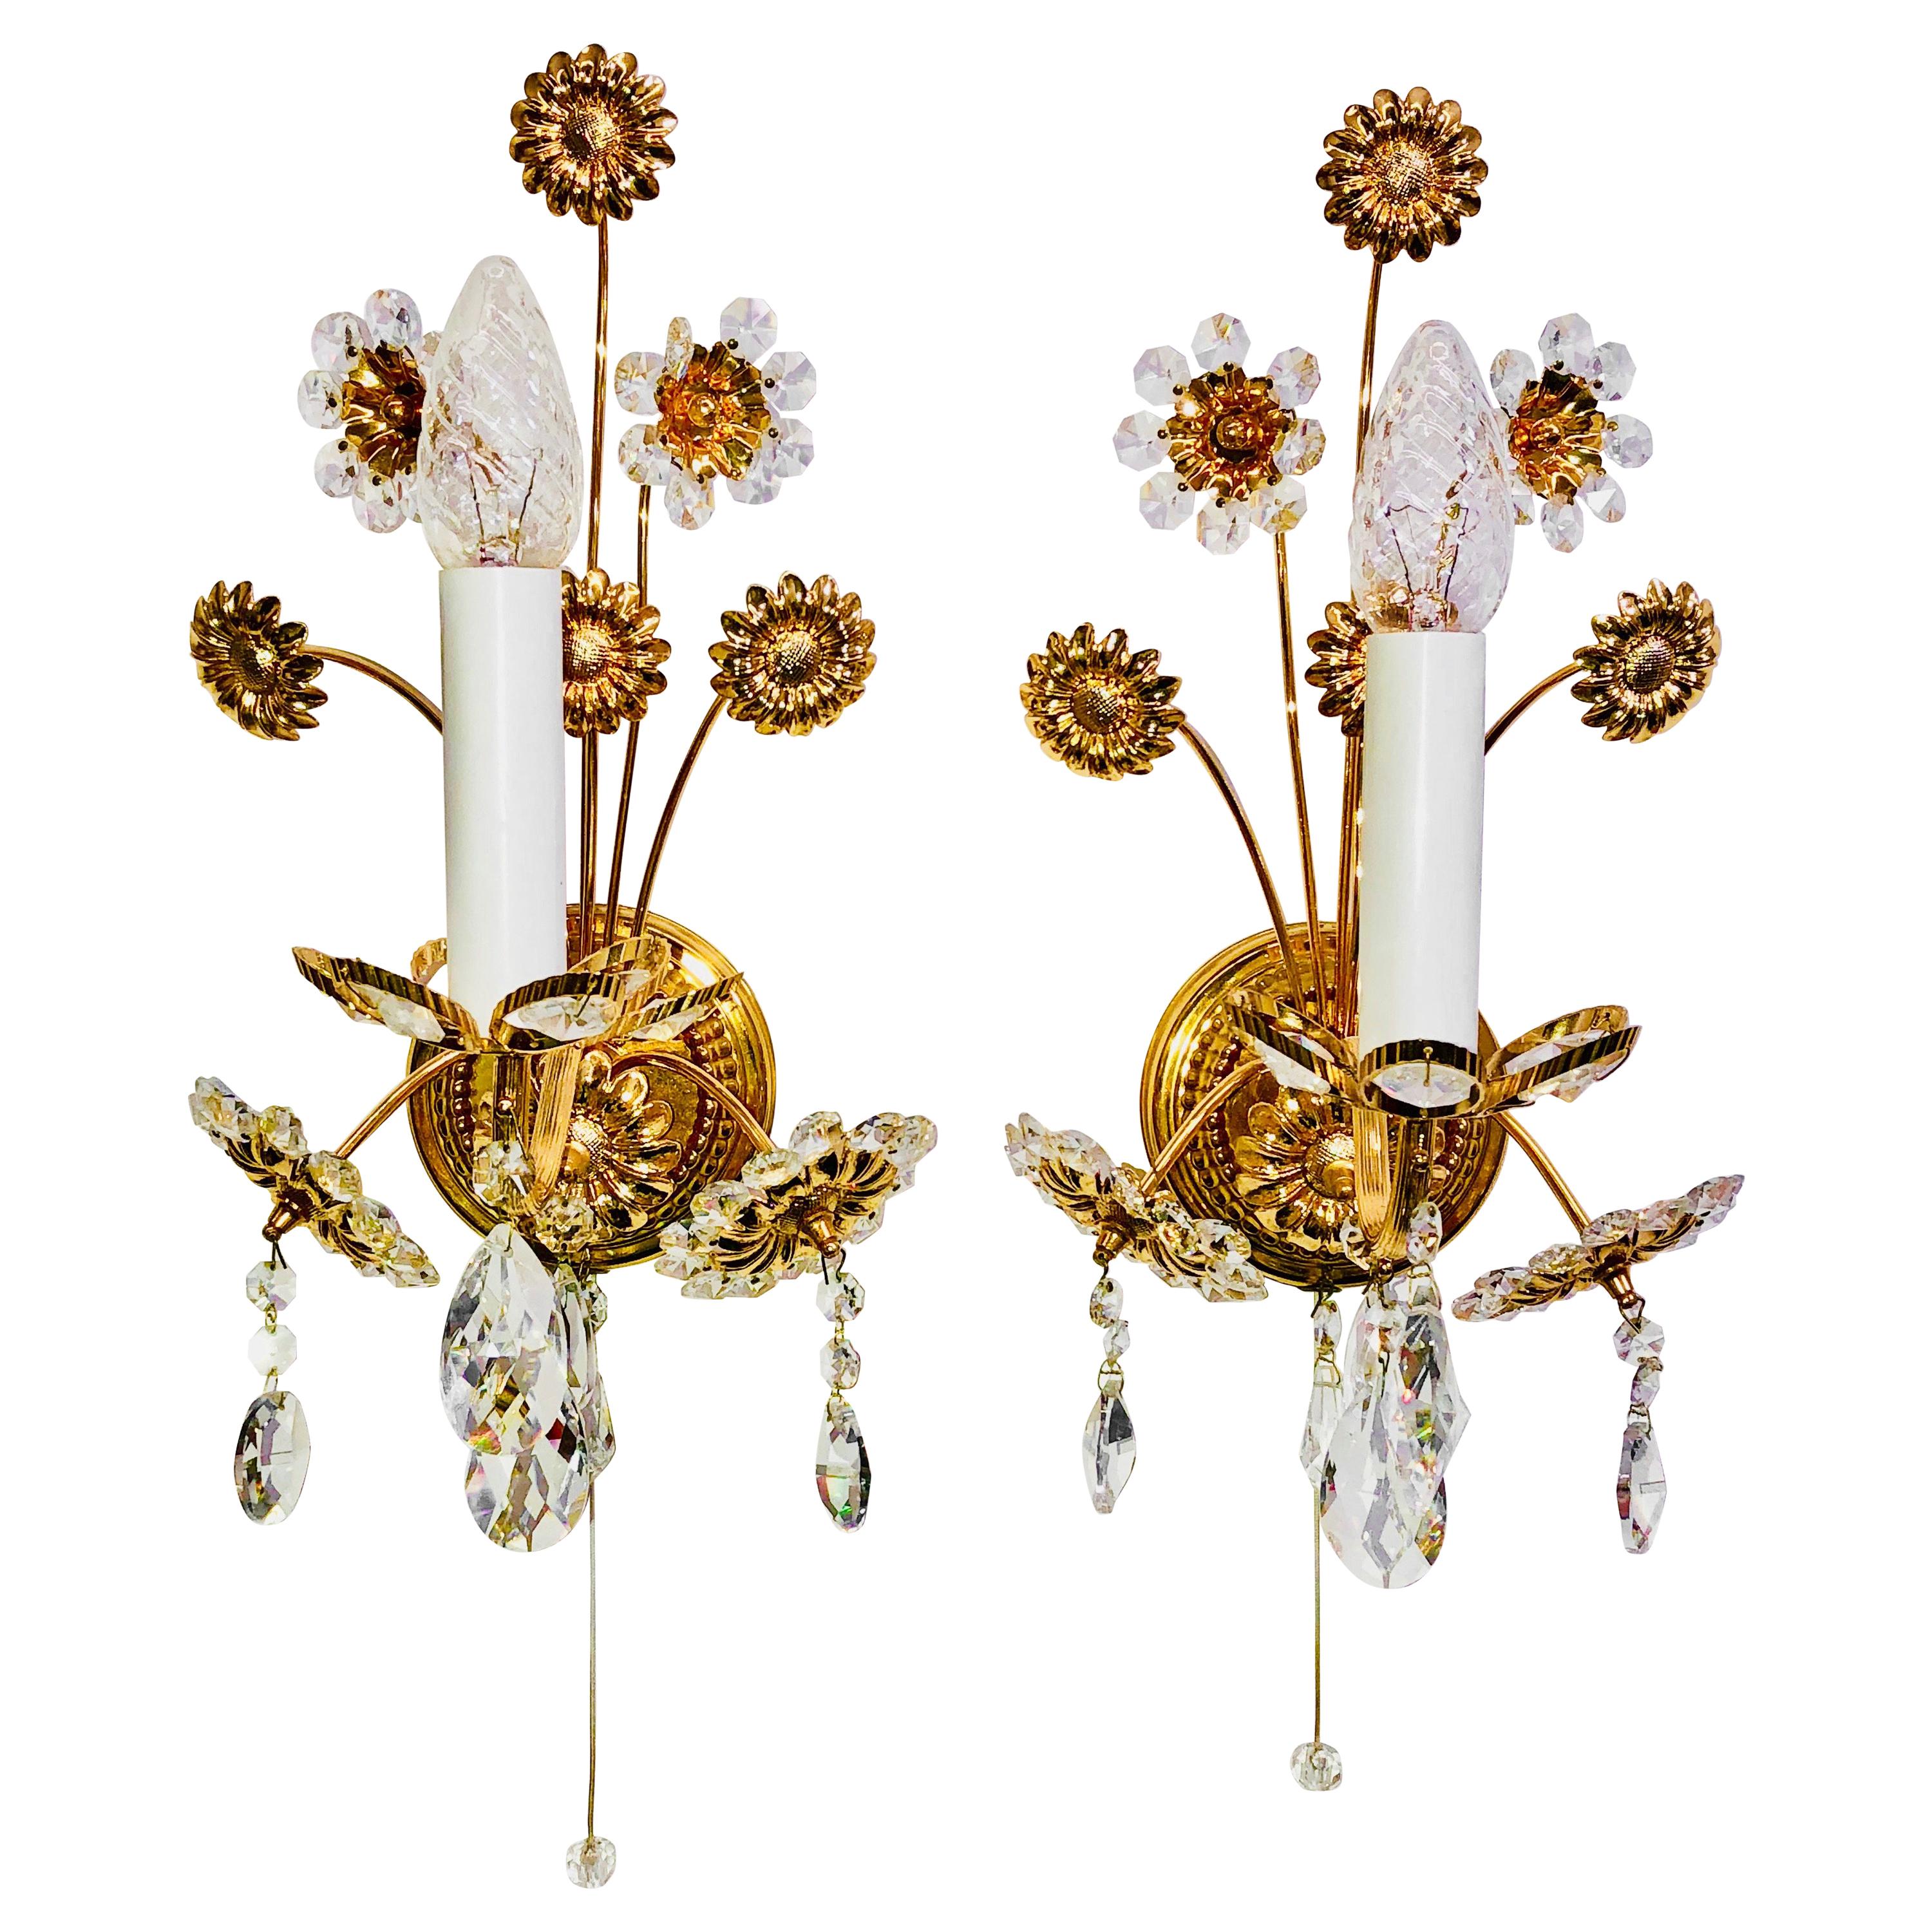 Pair of vintage gold-plated sconces with faceted crystal flowers made by the German company Palwa. Each fixture has one European style E14 socket. It requires a European E14 candelabra bulb, up to 40 Watt.